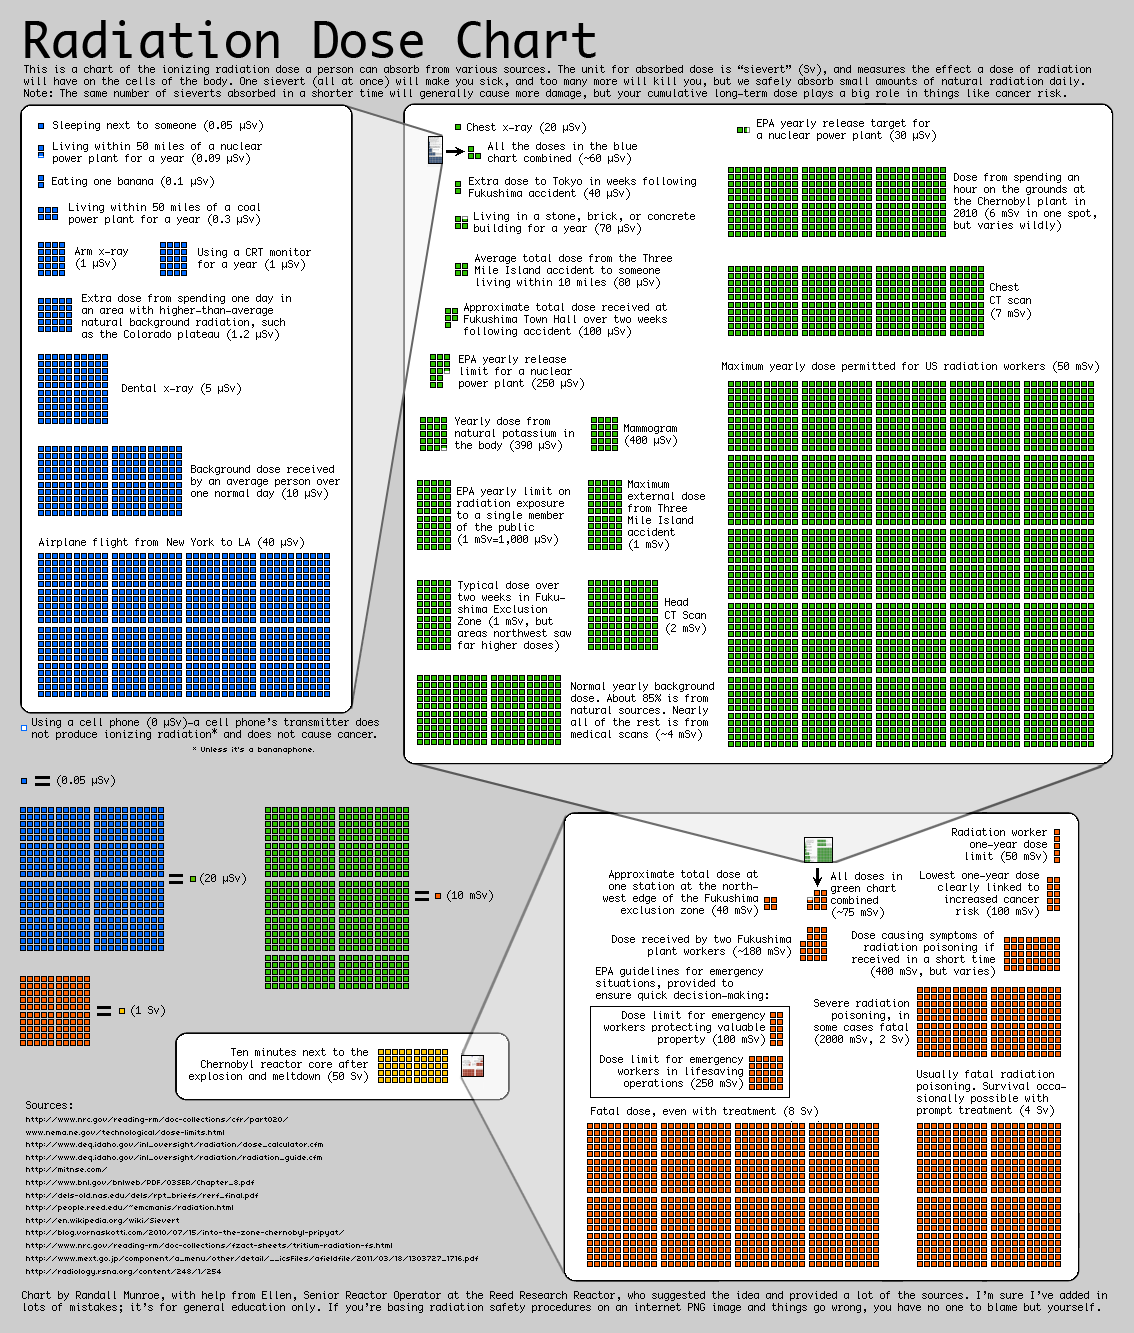 radiation dose chart infographic xkcd A Handy Guide to Radiation Doses (Infographic)